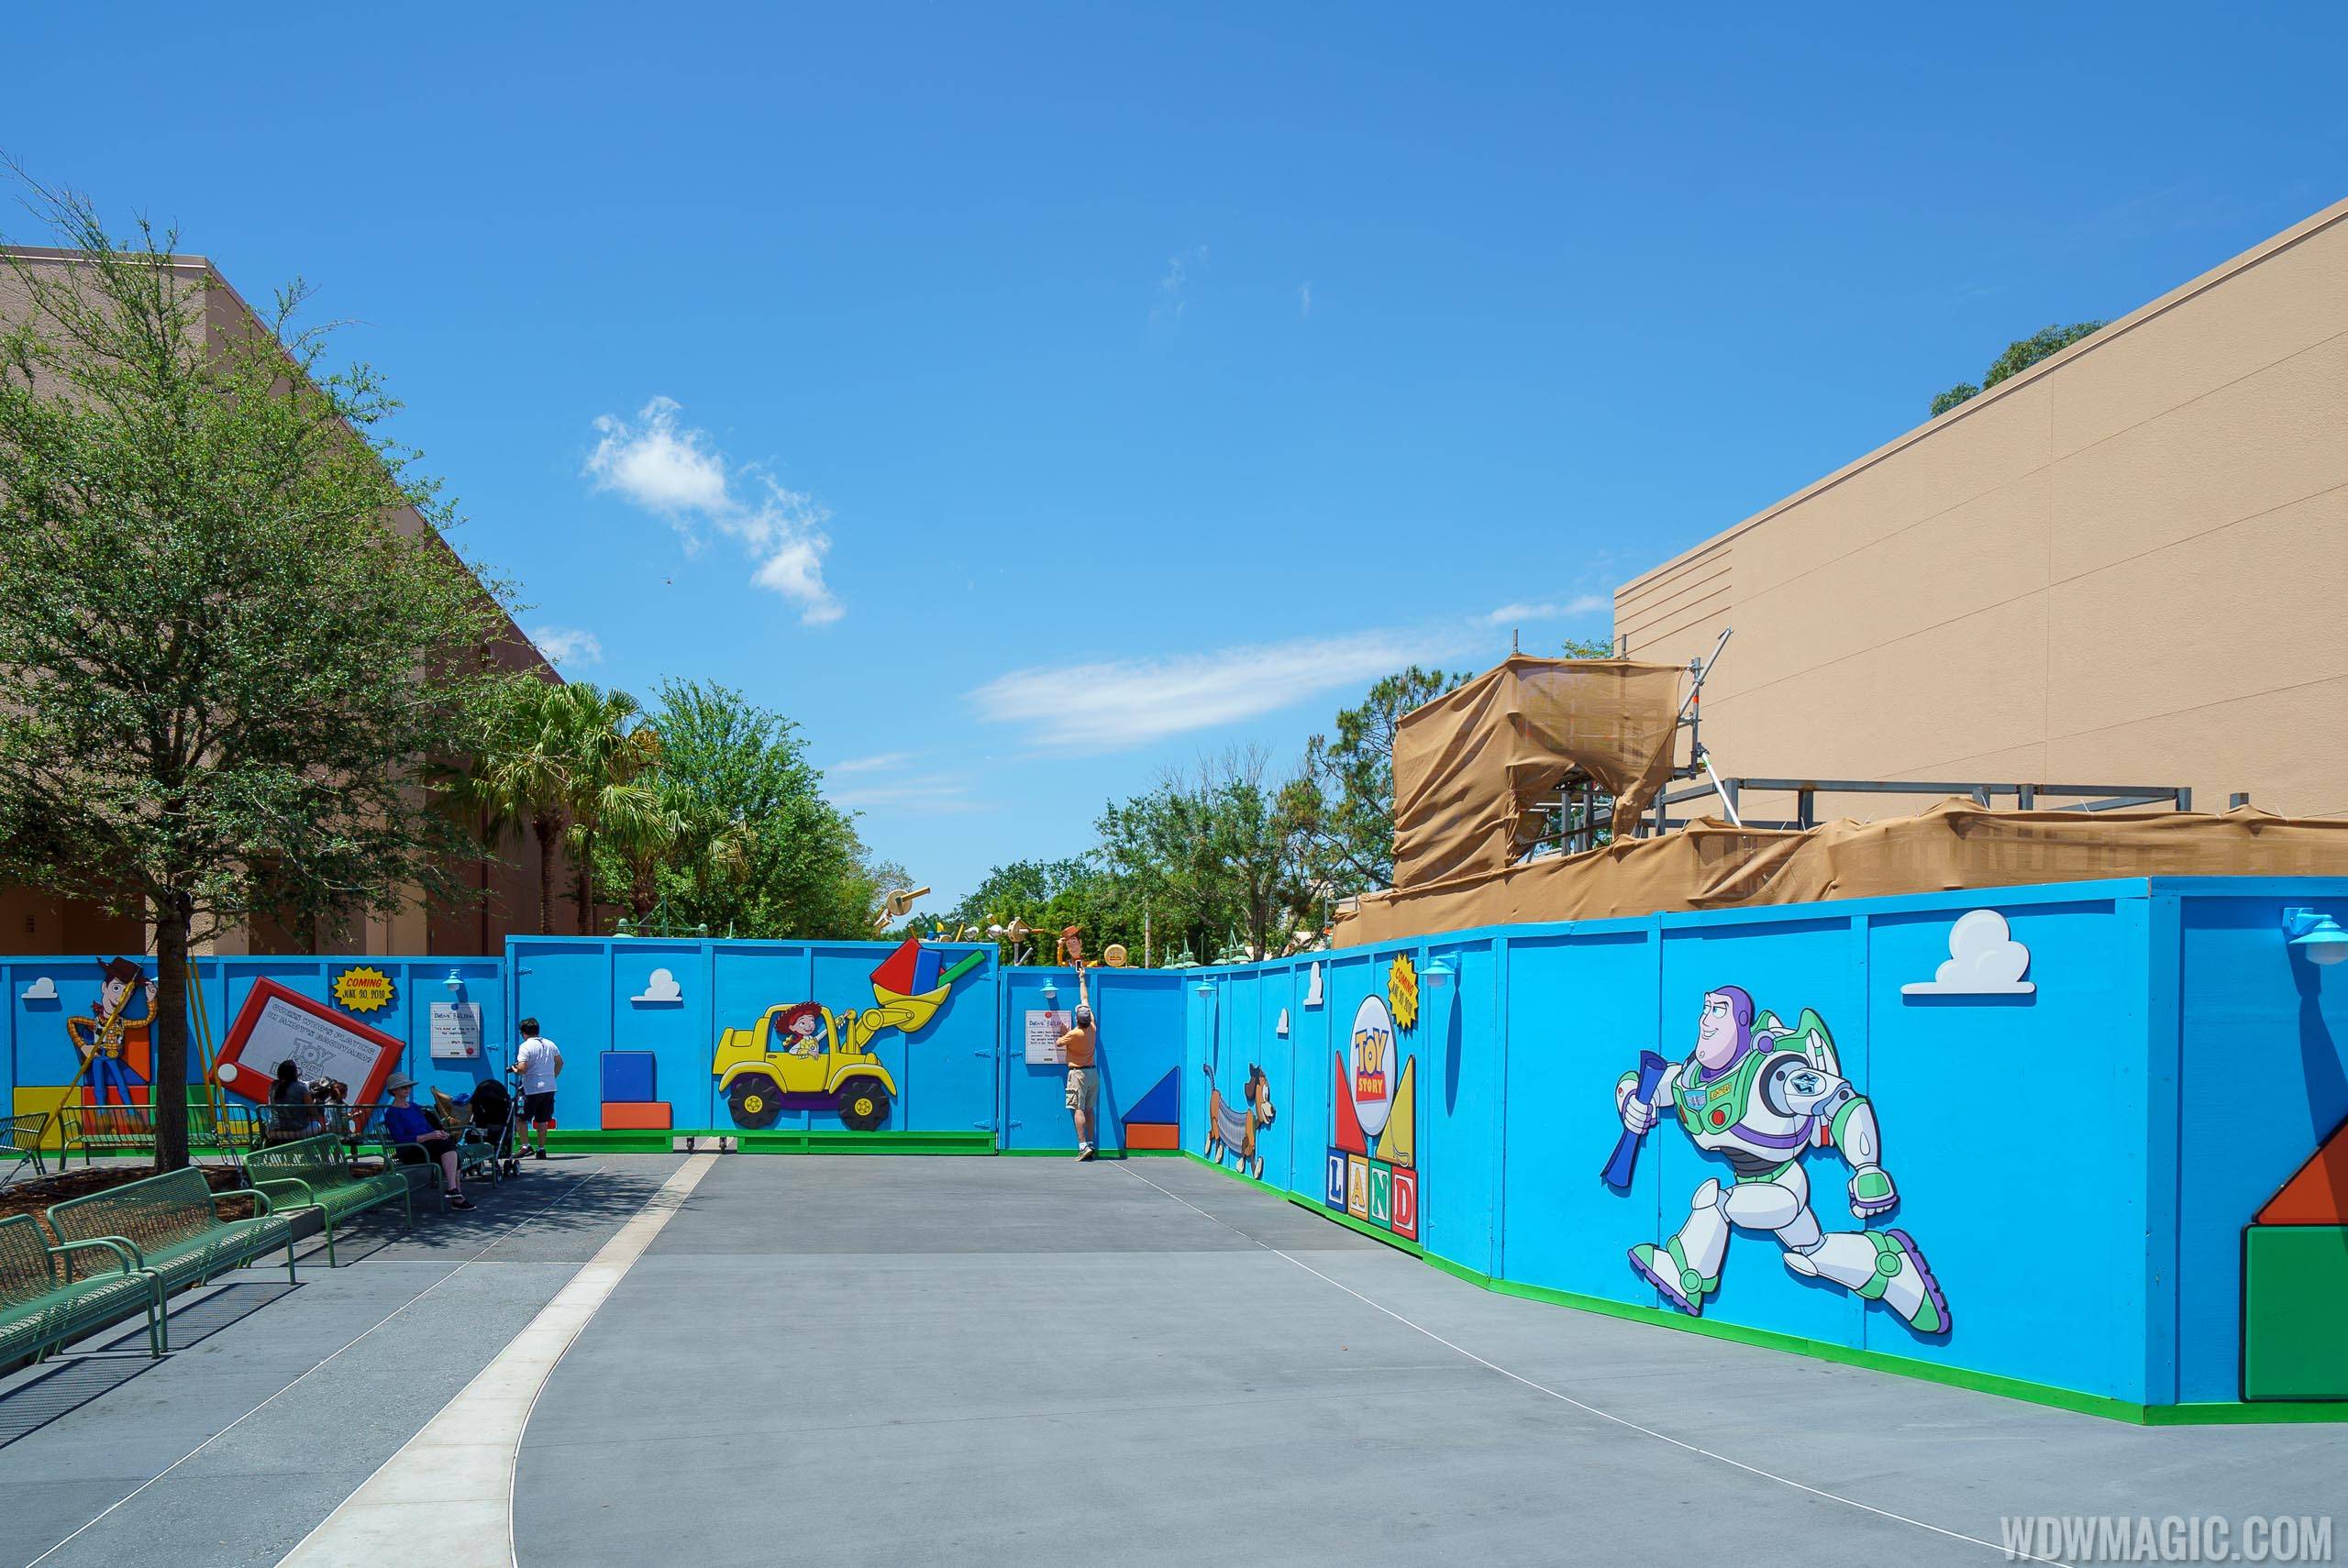 The entrance to Toy Story Land